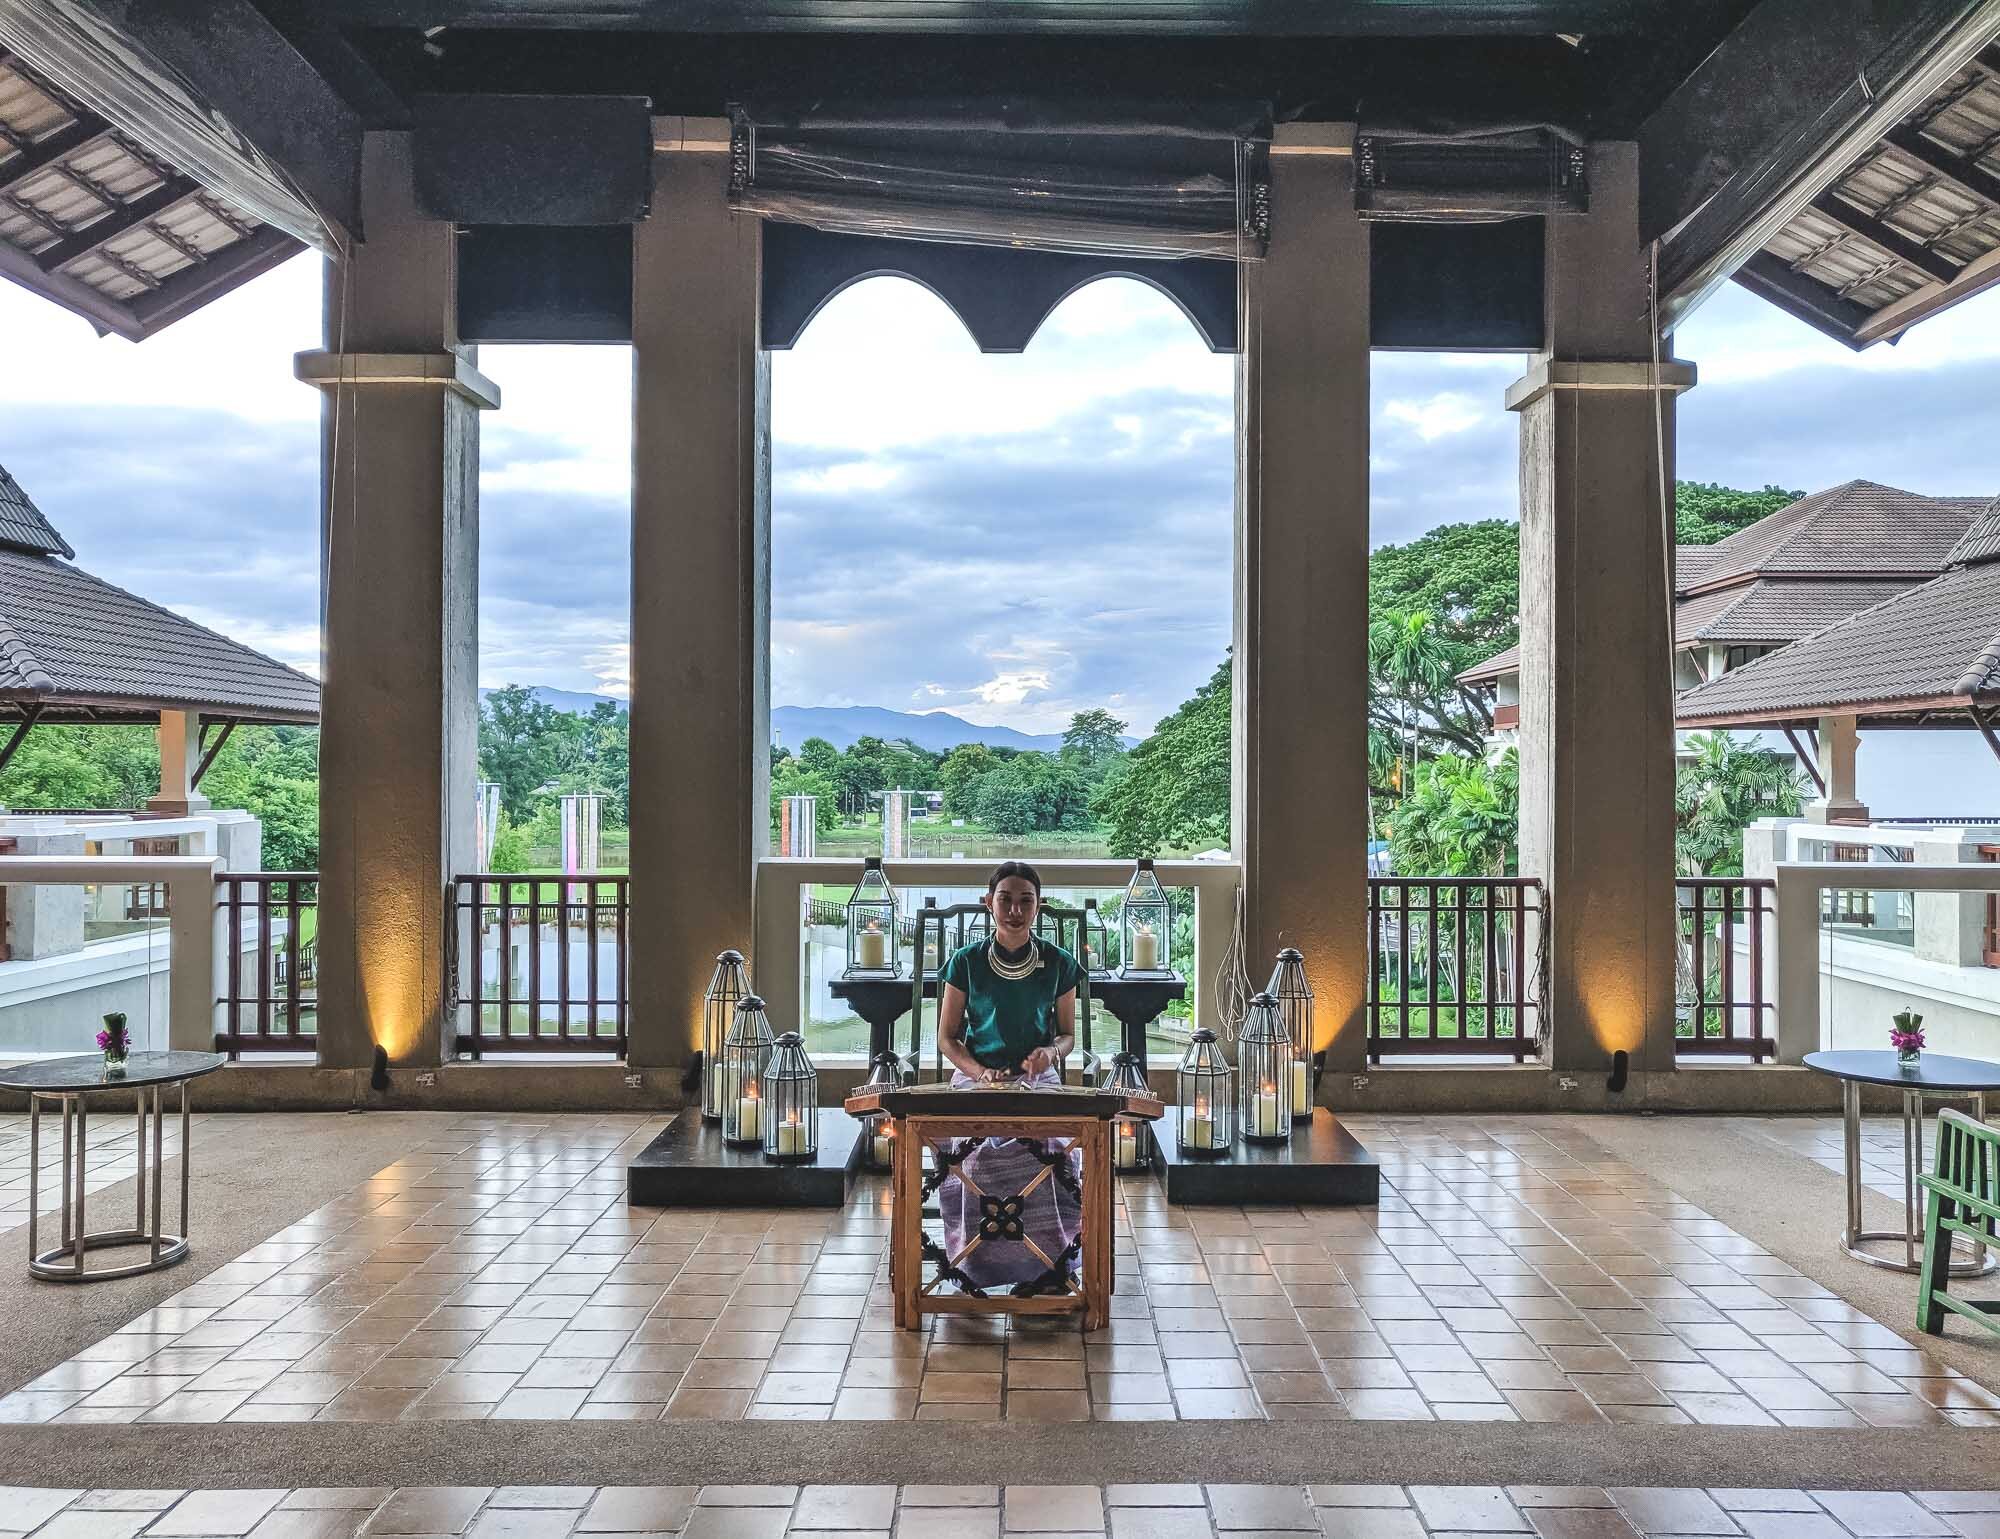 Live traditional Thai music playing at the lobby in the evening